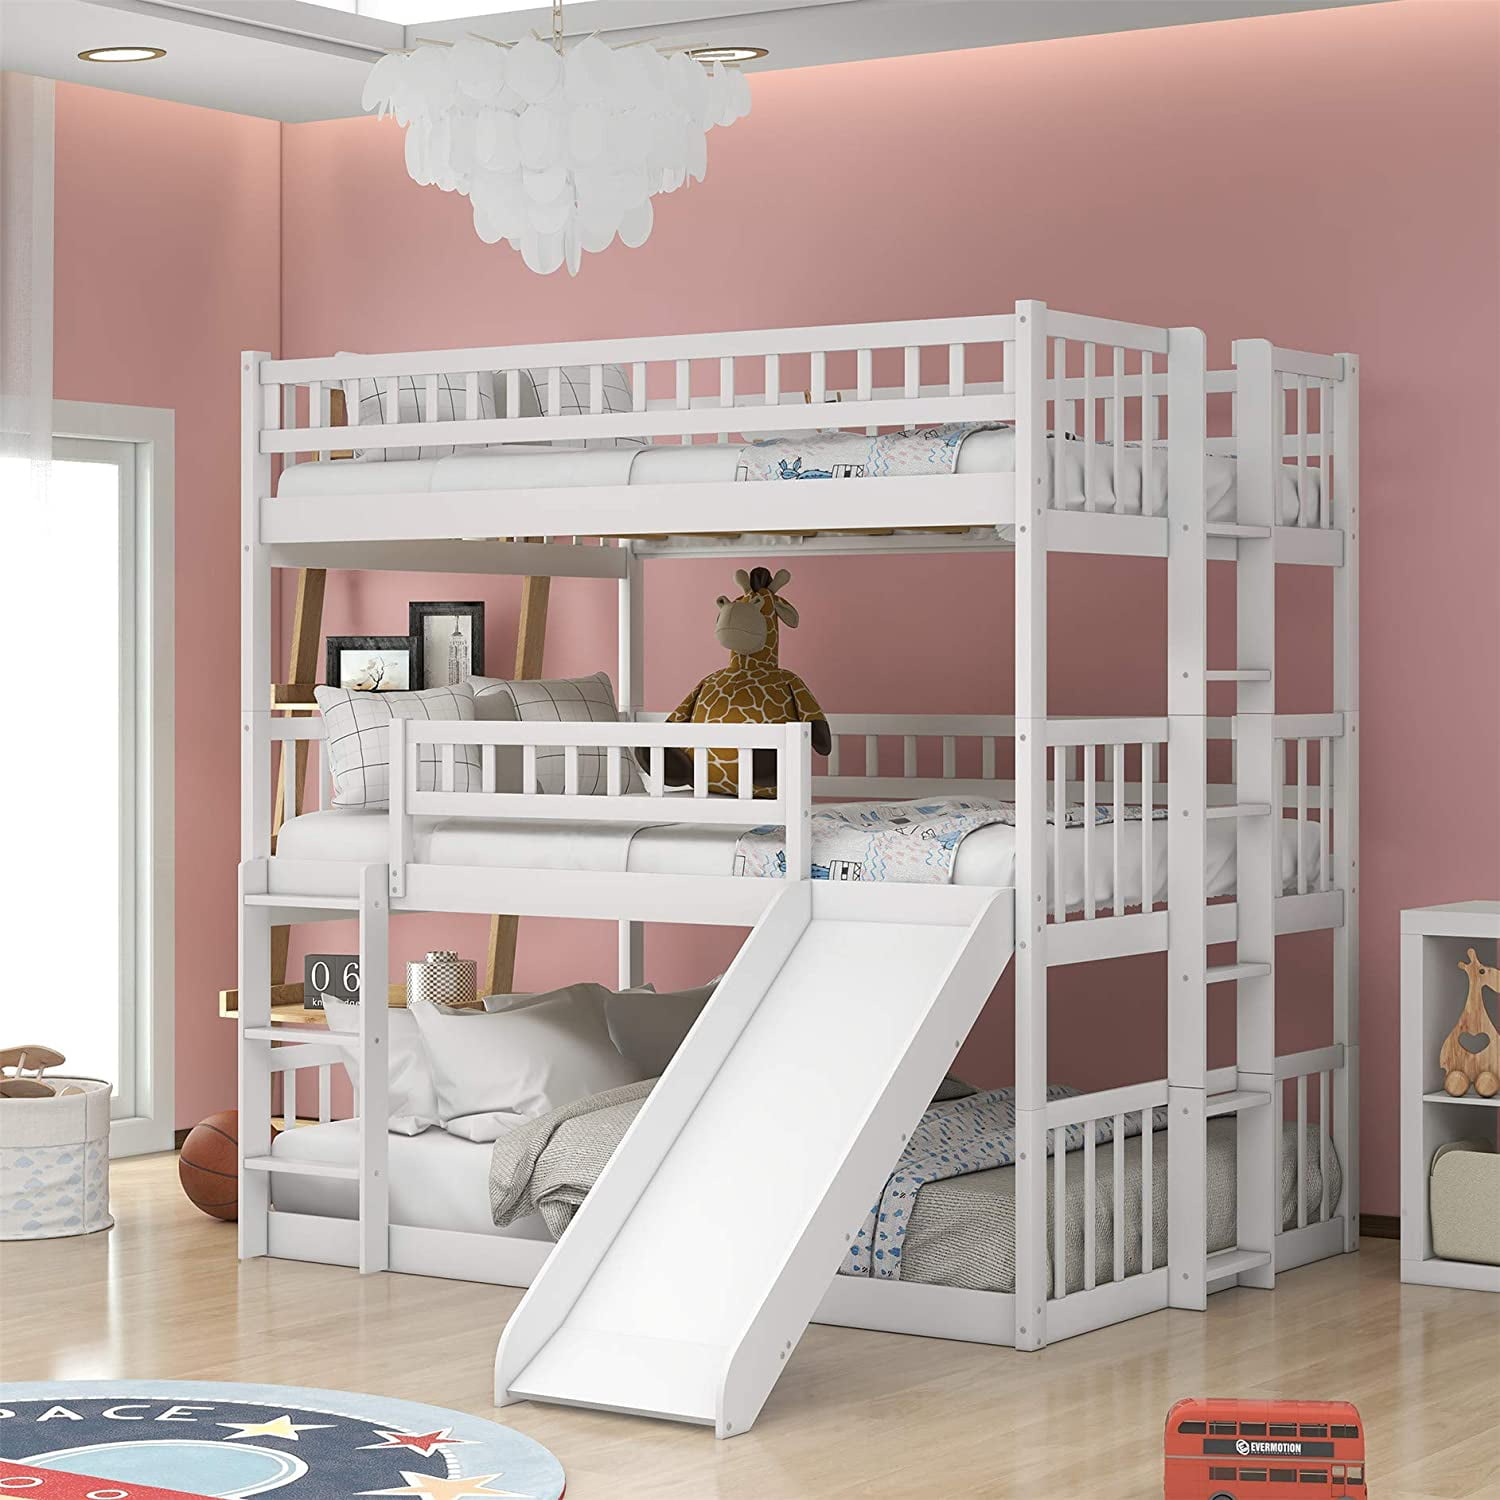 Slide Wooden Bunk Beds Full, Bunk Bed With Swing